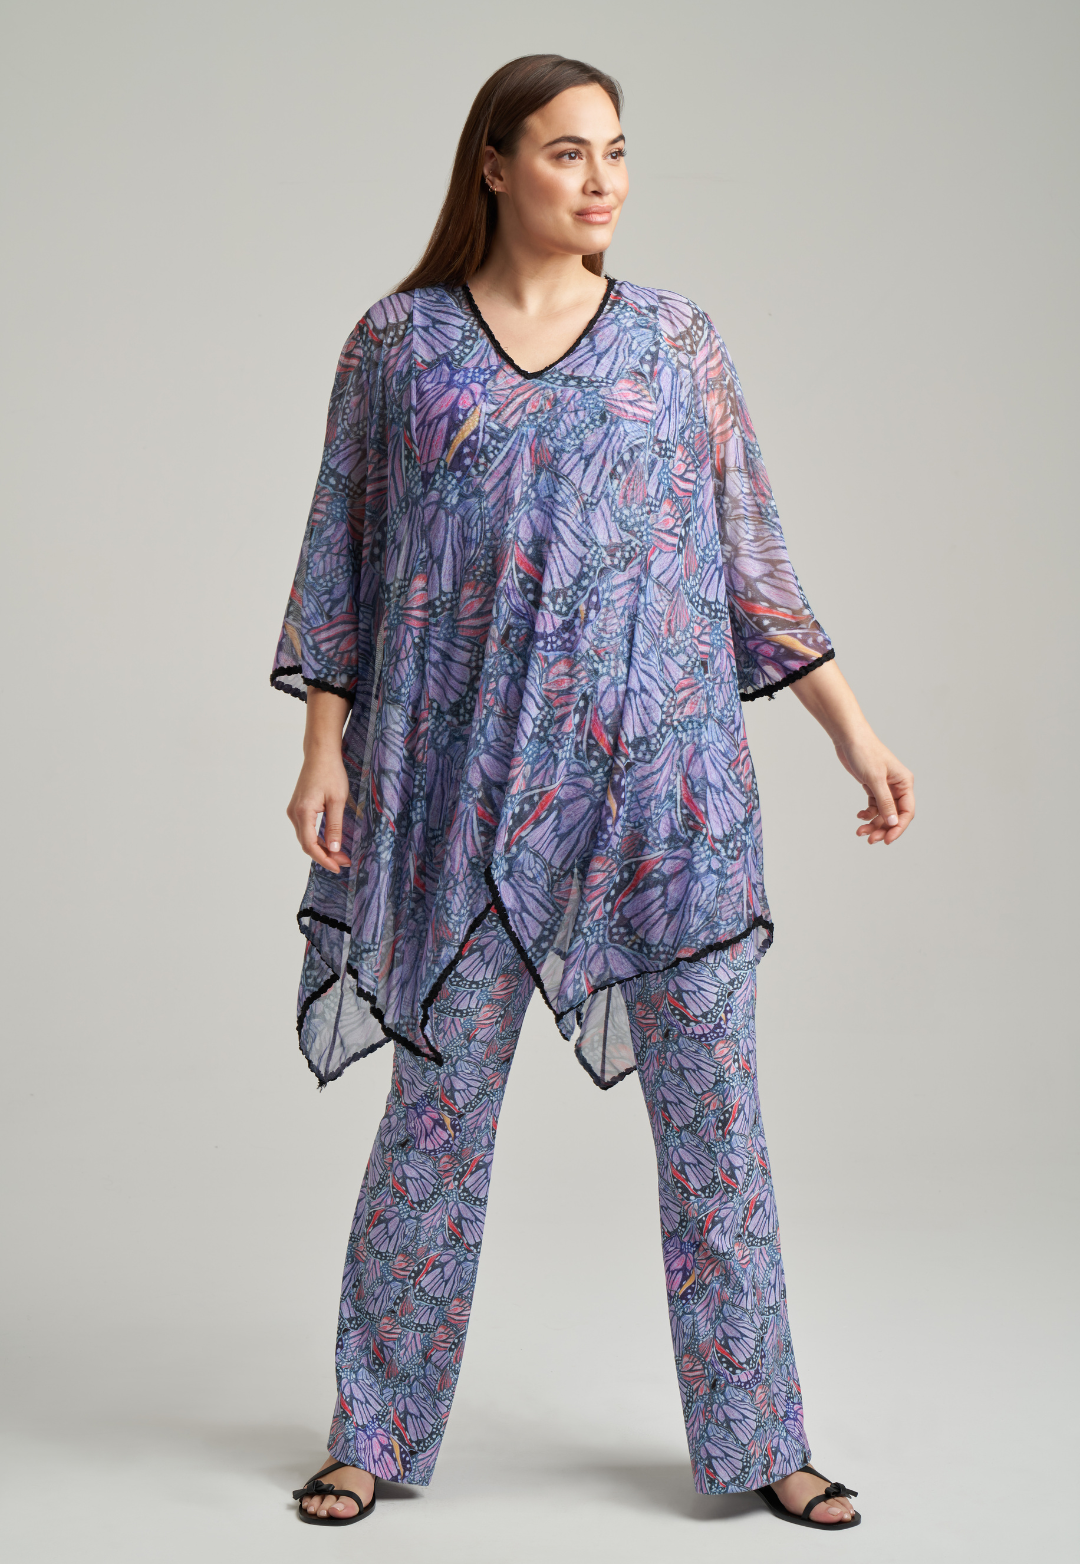 Woman wearing butterfly printed mesh poncho with black trim over printed stretch knit tank top and stretch knit pants by Ala von Auersperg for spring summer 2021